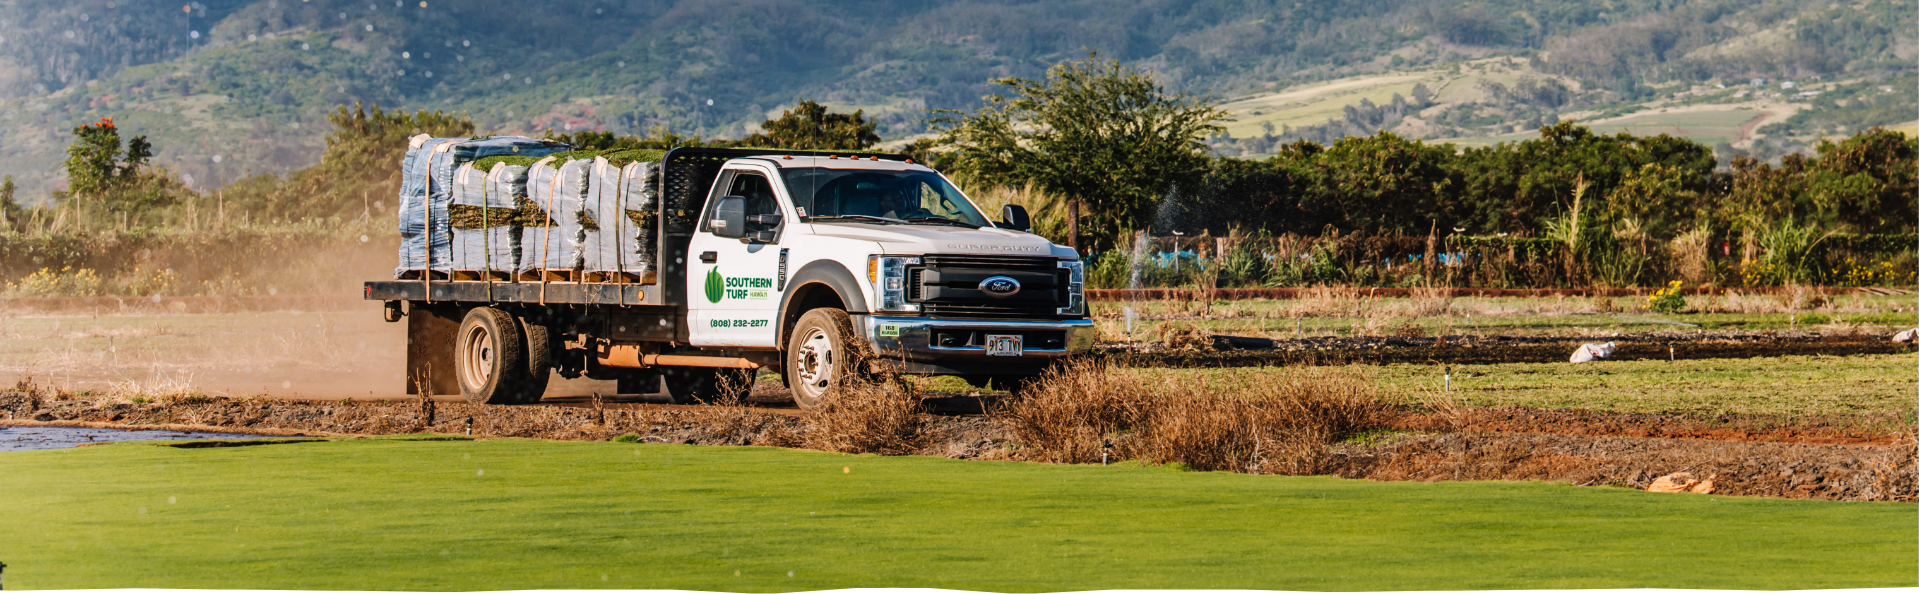 Southern Turf Hawaii pickup truck driving a load of sod mats and driving the turfgrass mats across fields of bermudagrass on the farm